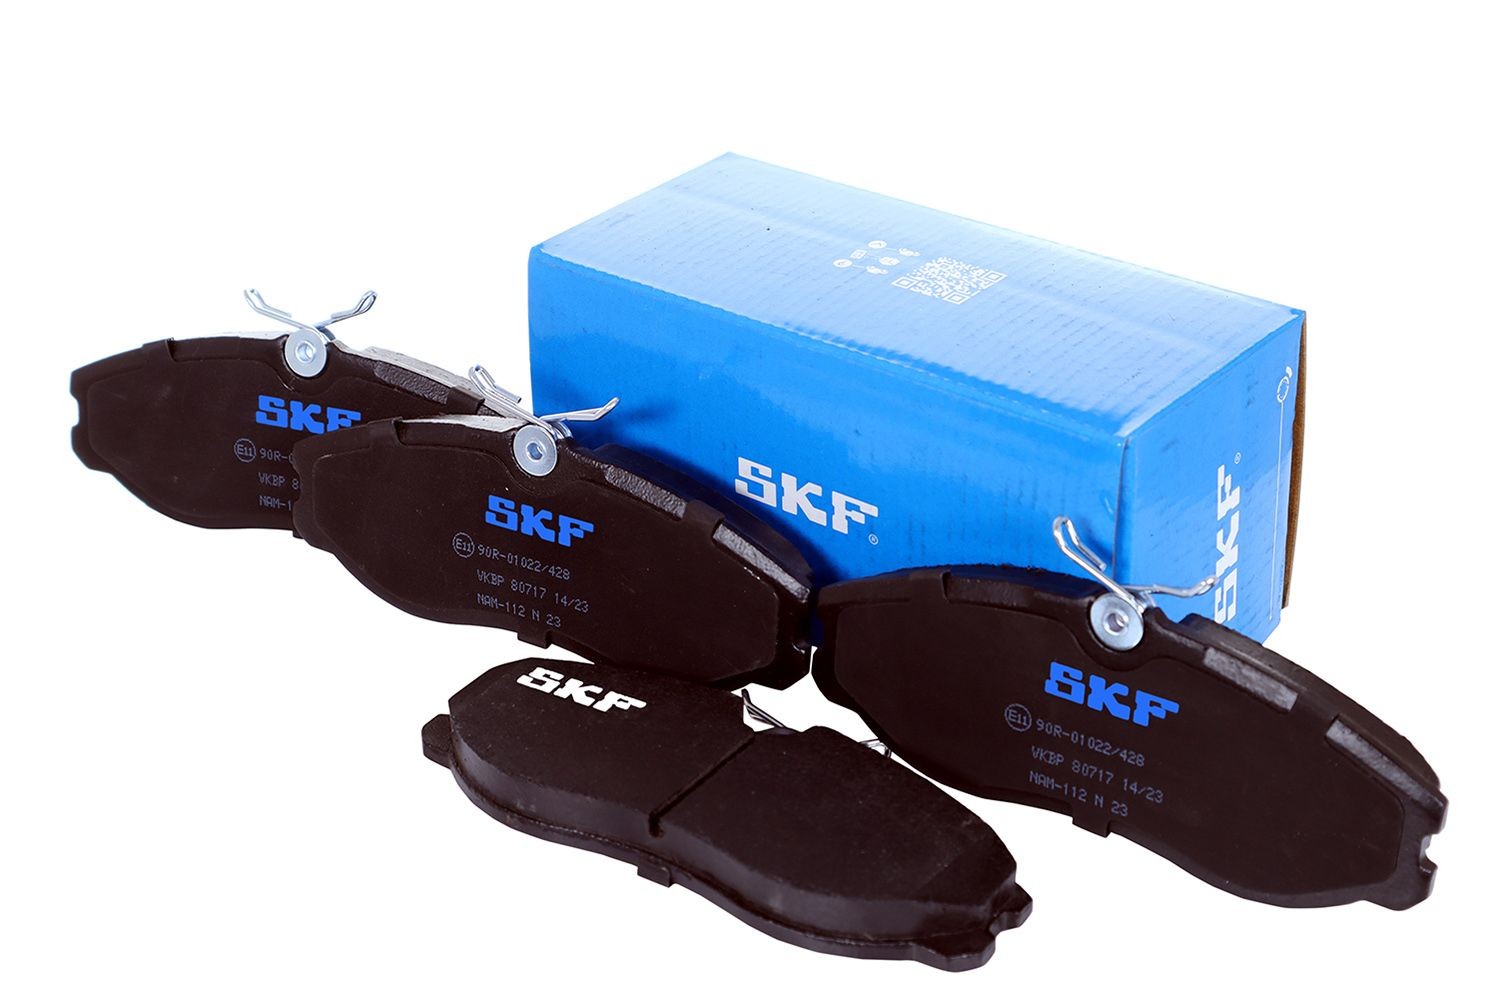 21410 SKF prepared for wear indicator Height: 55,6mm, Thickness: 15,5mm Brake pads VKBP 80717 buy